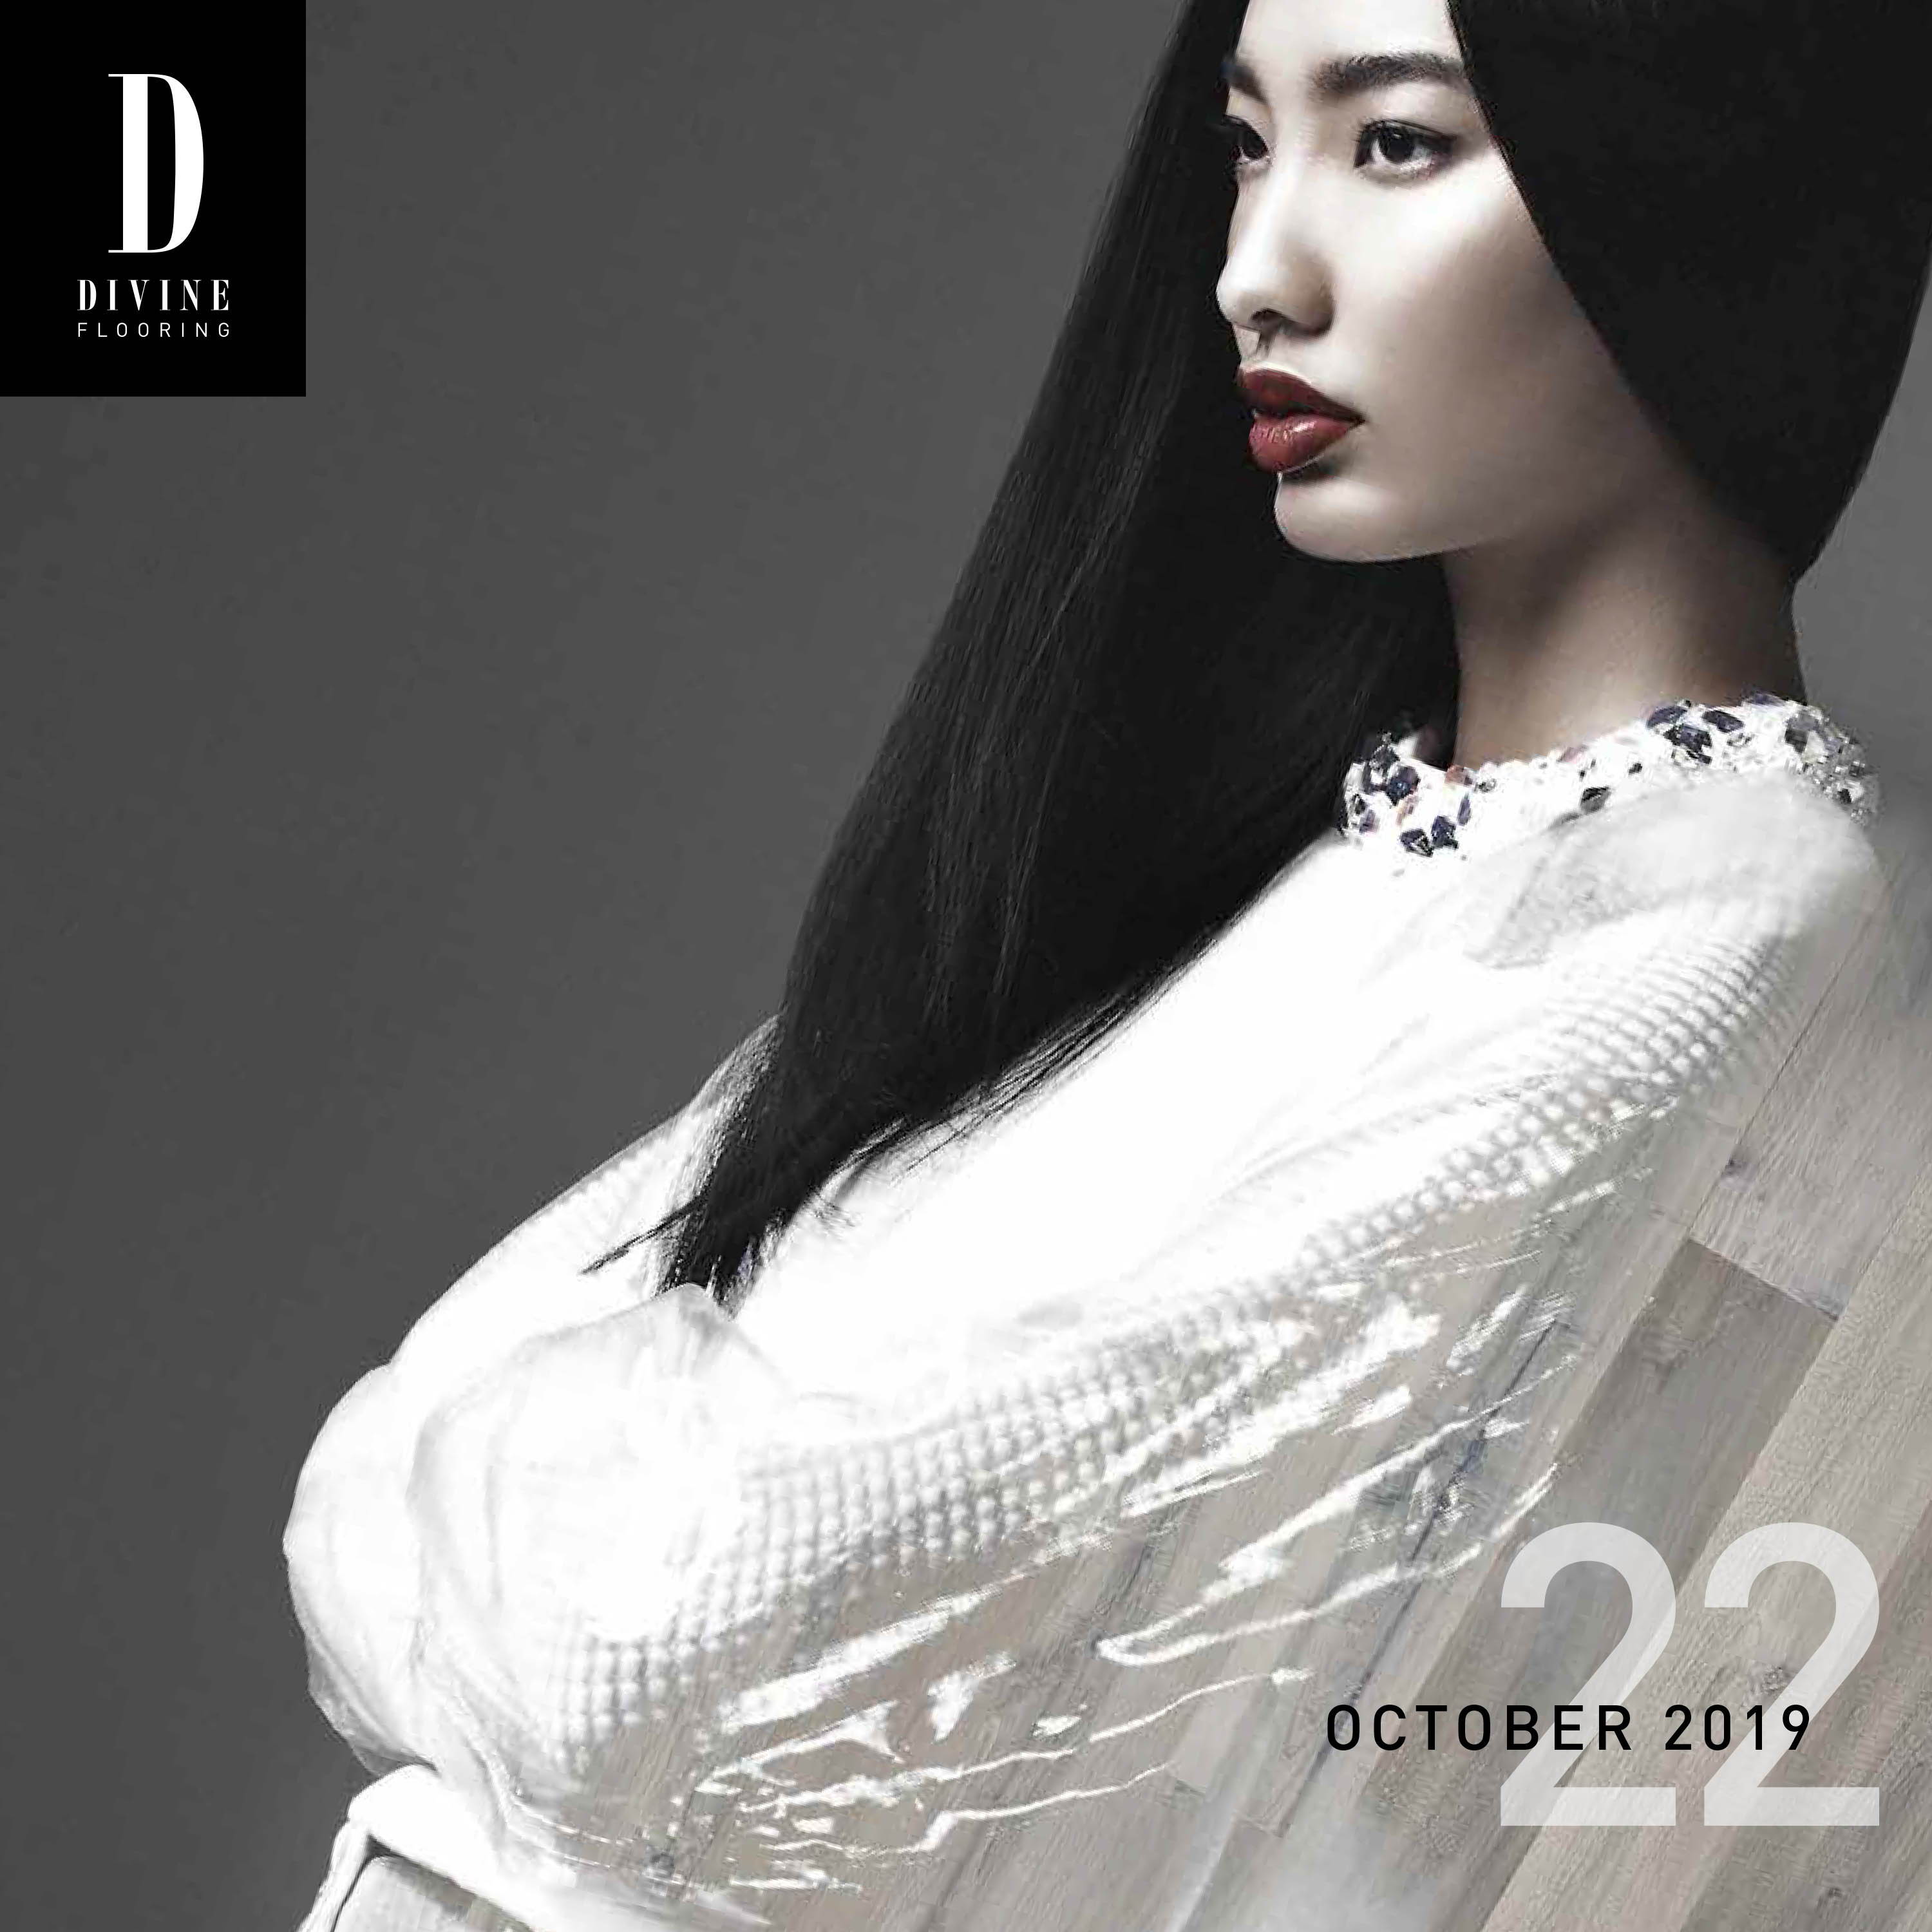 Cover of d-zine digital magazine with a fashionable Asian woman